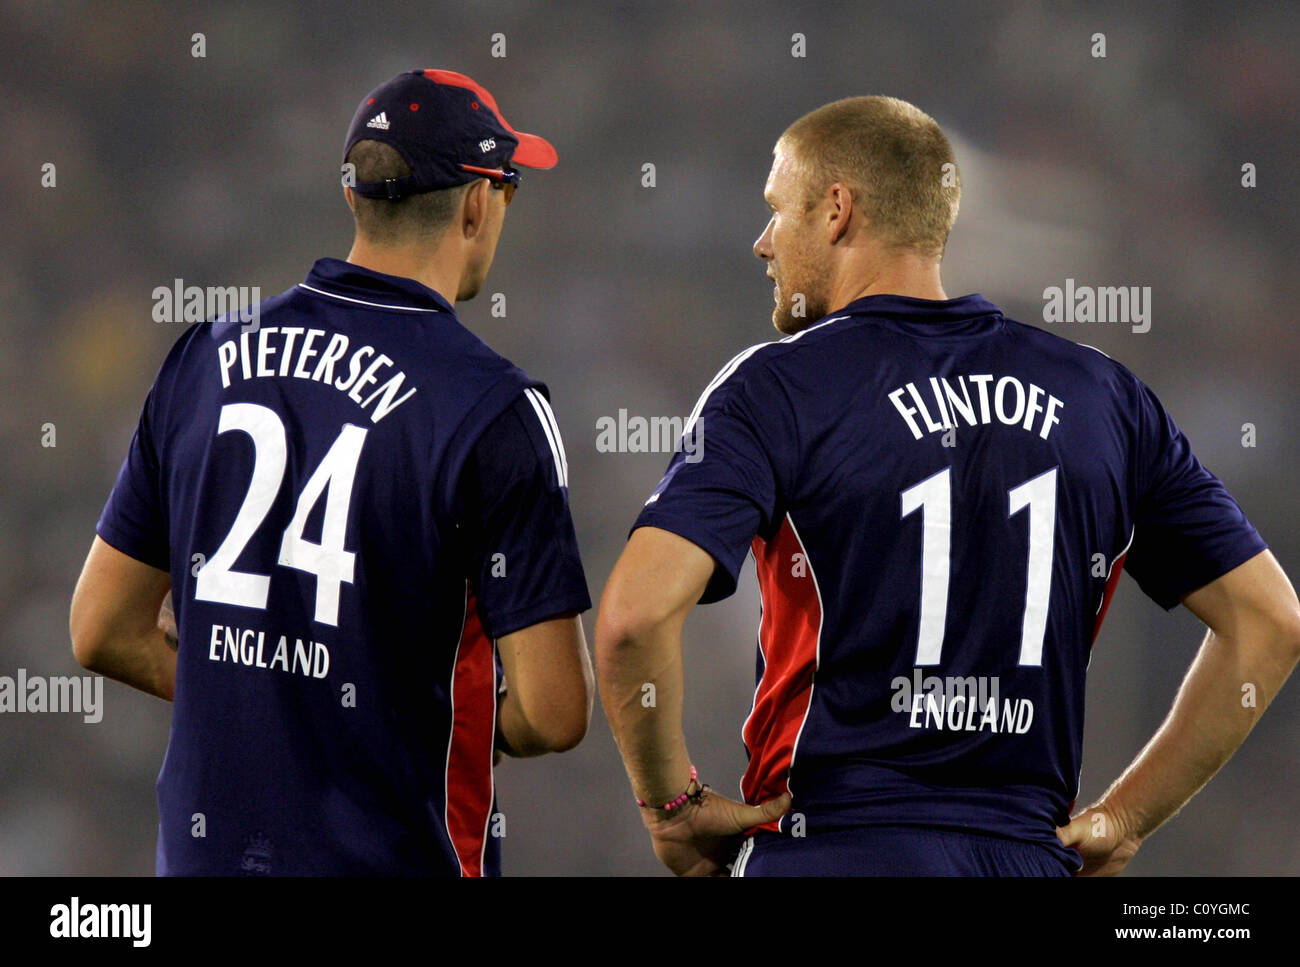 Kevin Pietersen and Andrew Flintoff 5th 